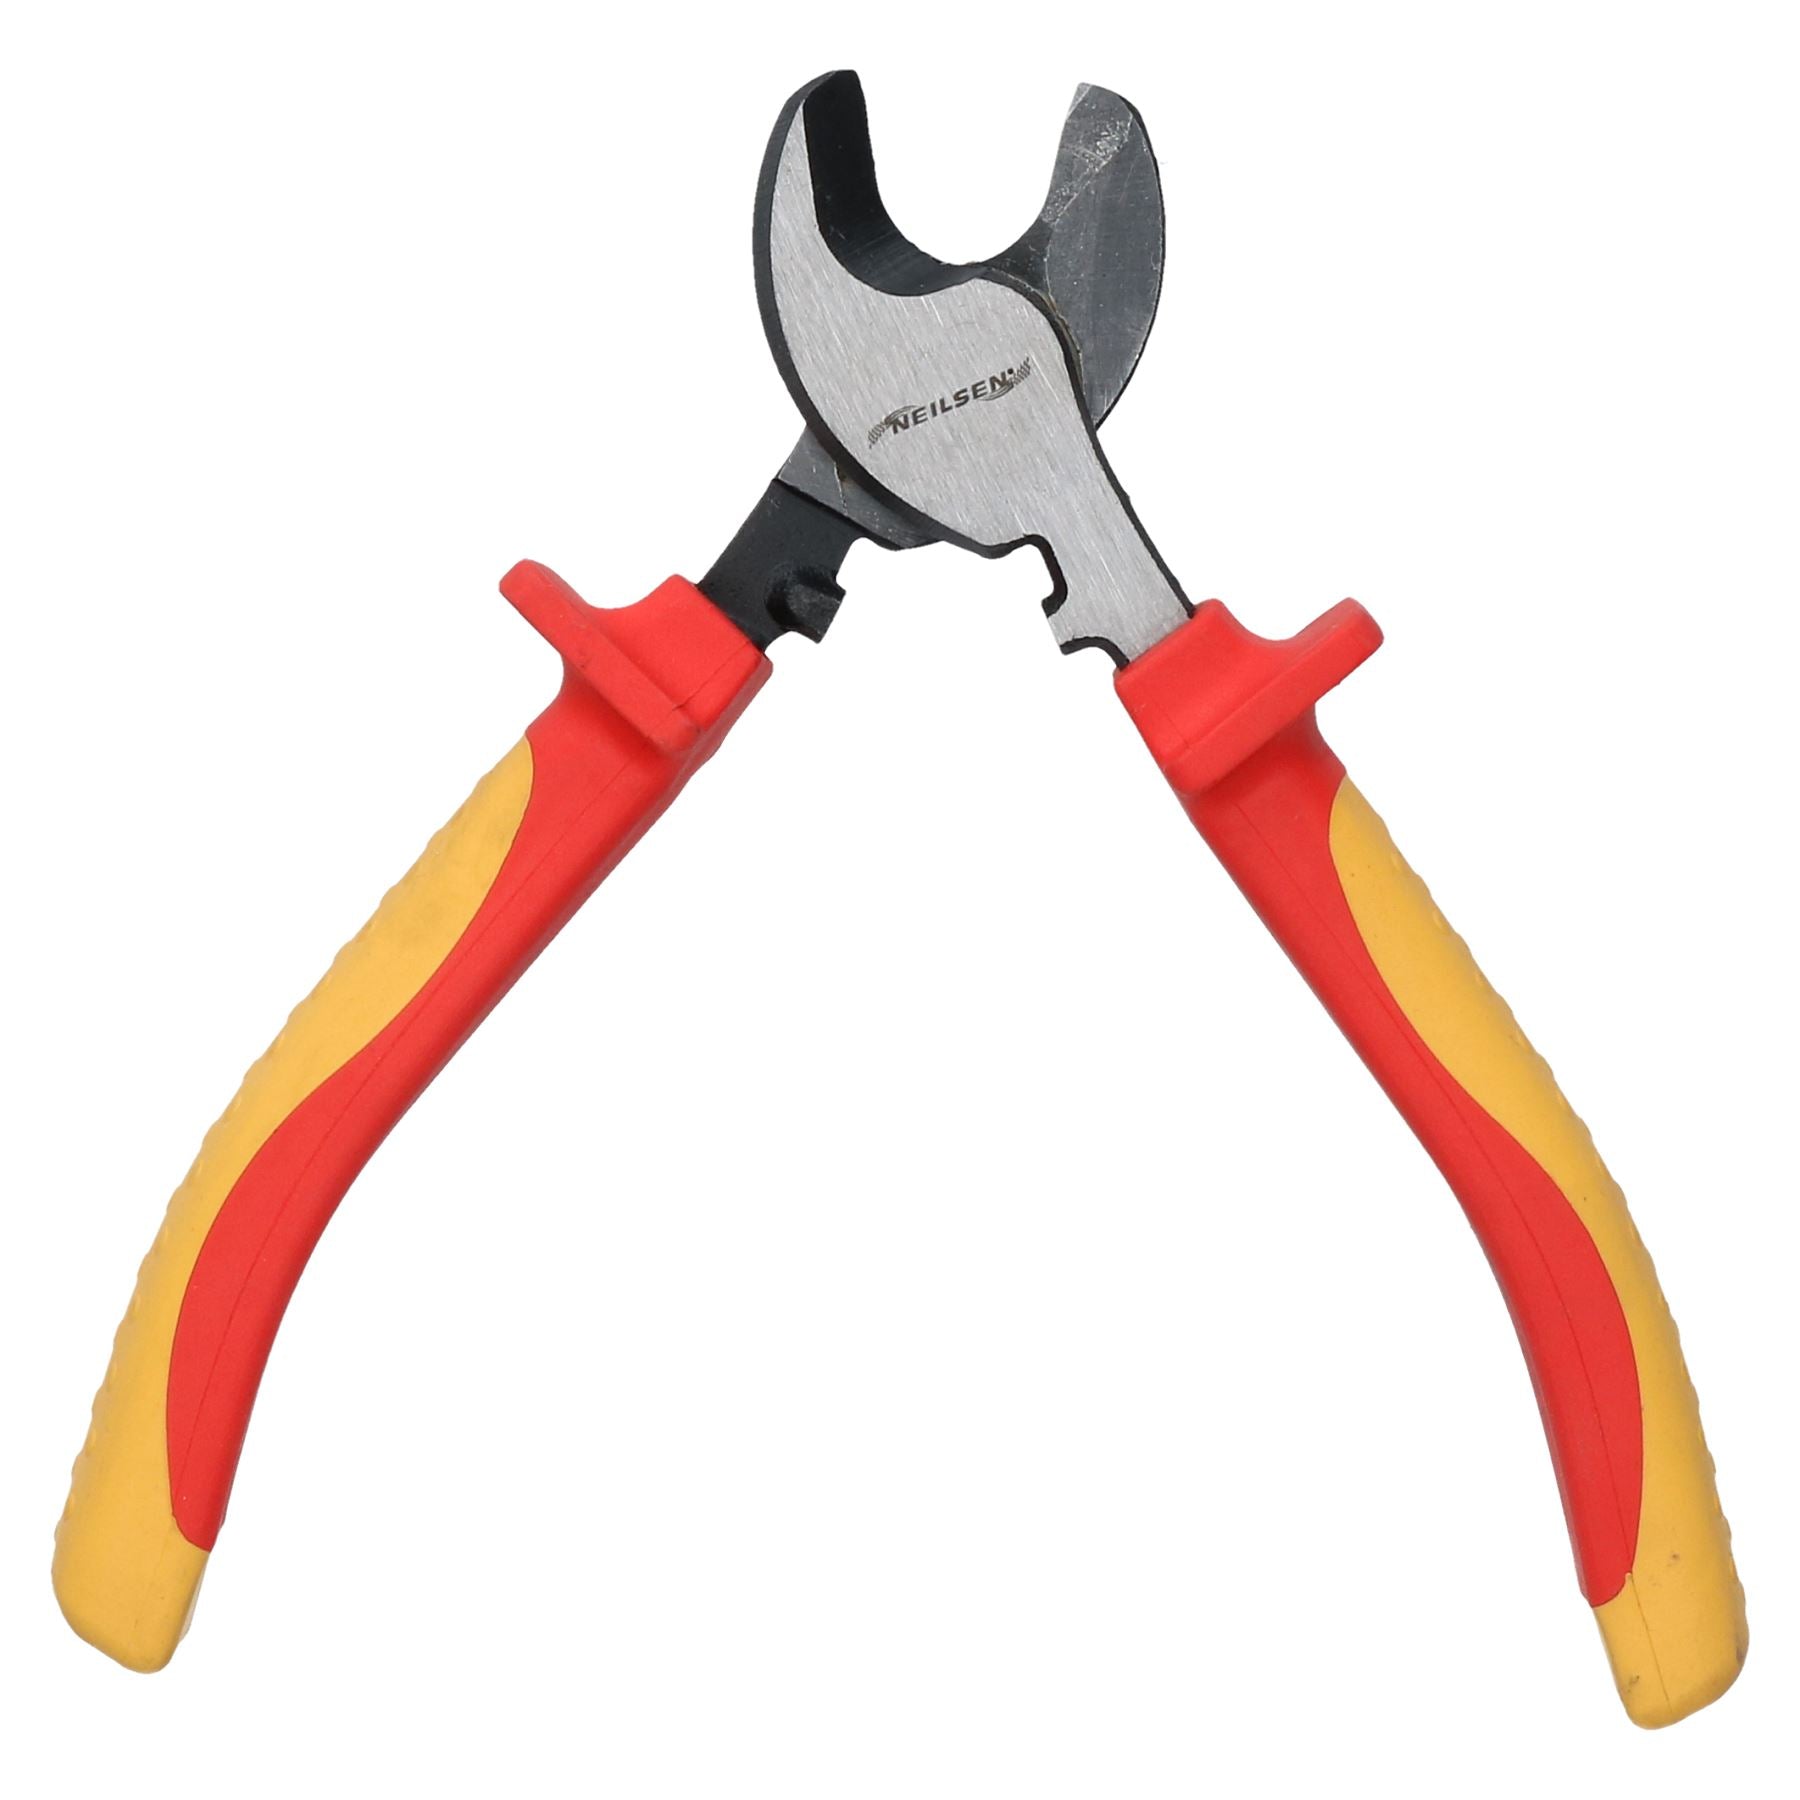 6" VDE Insulated Electricians Electrical Cable Cutter Cutting Cut Pliers Snips